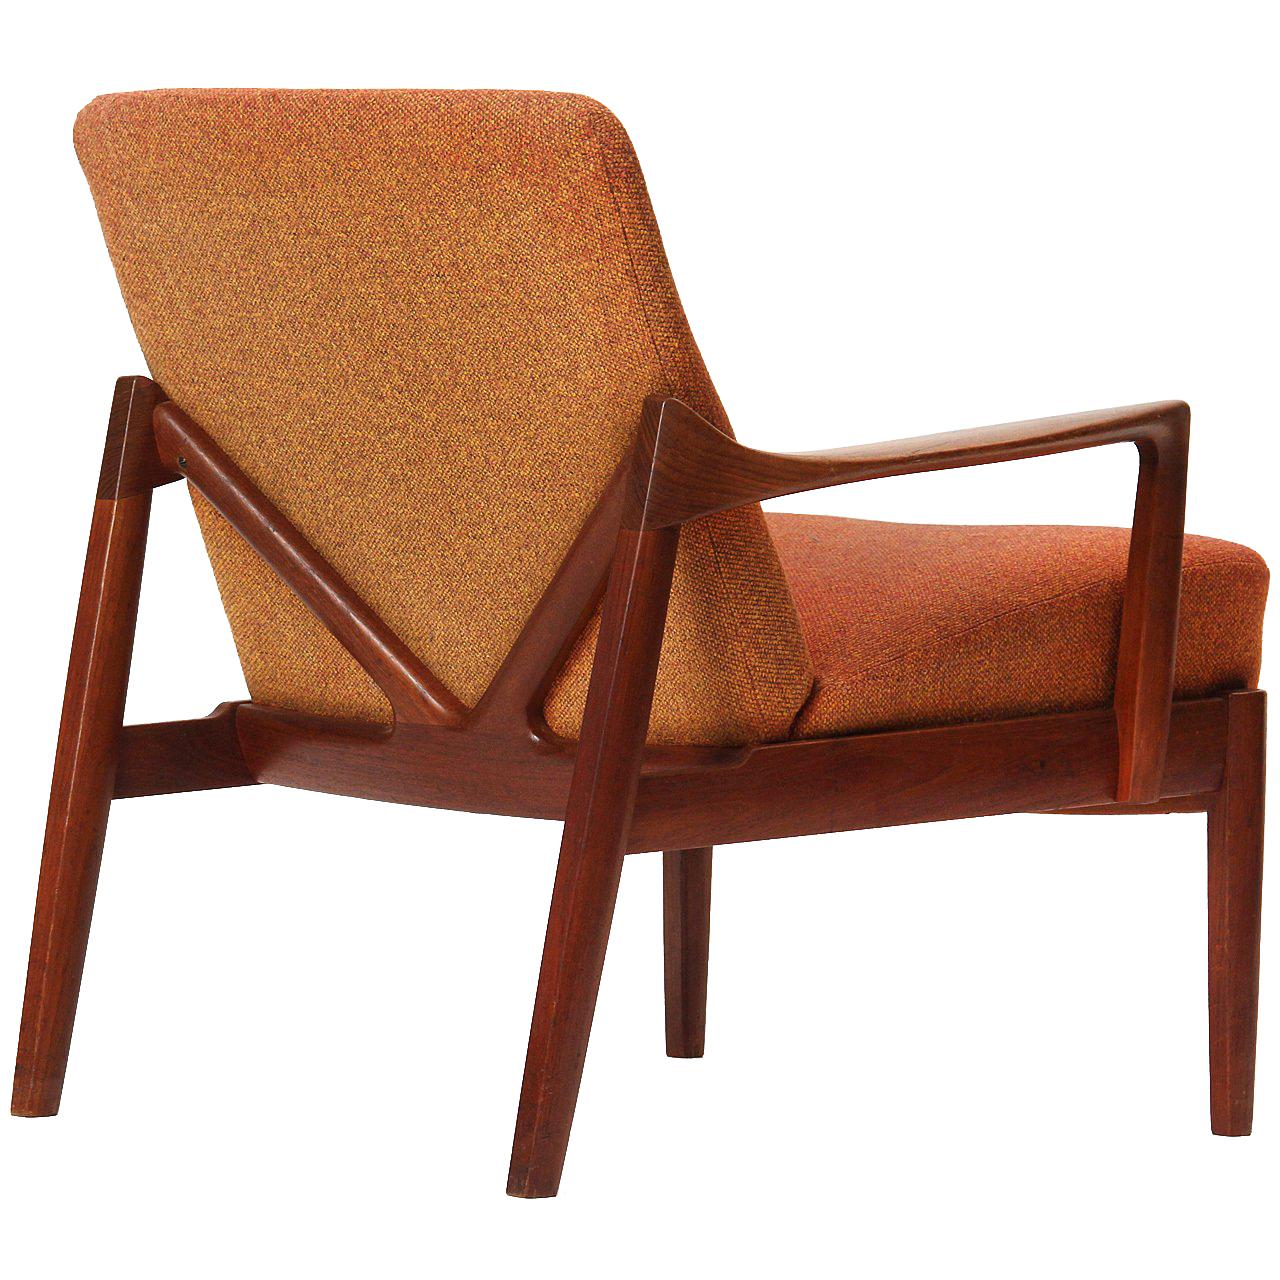 Scandinavian Modern Lounge Chair by Edward and Tove Kindt-Larsen For Sale